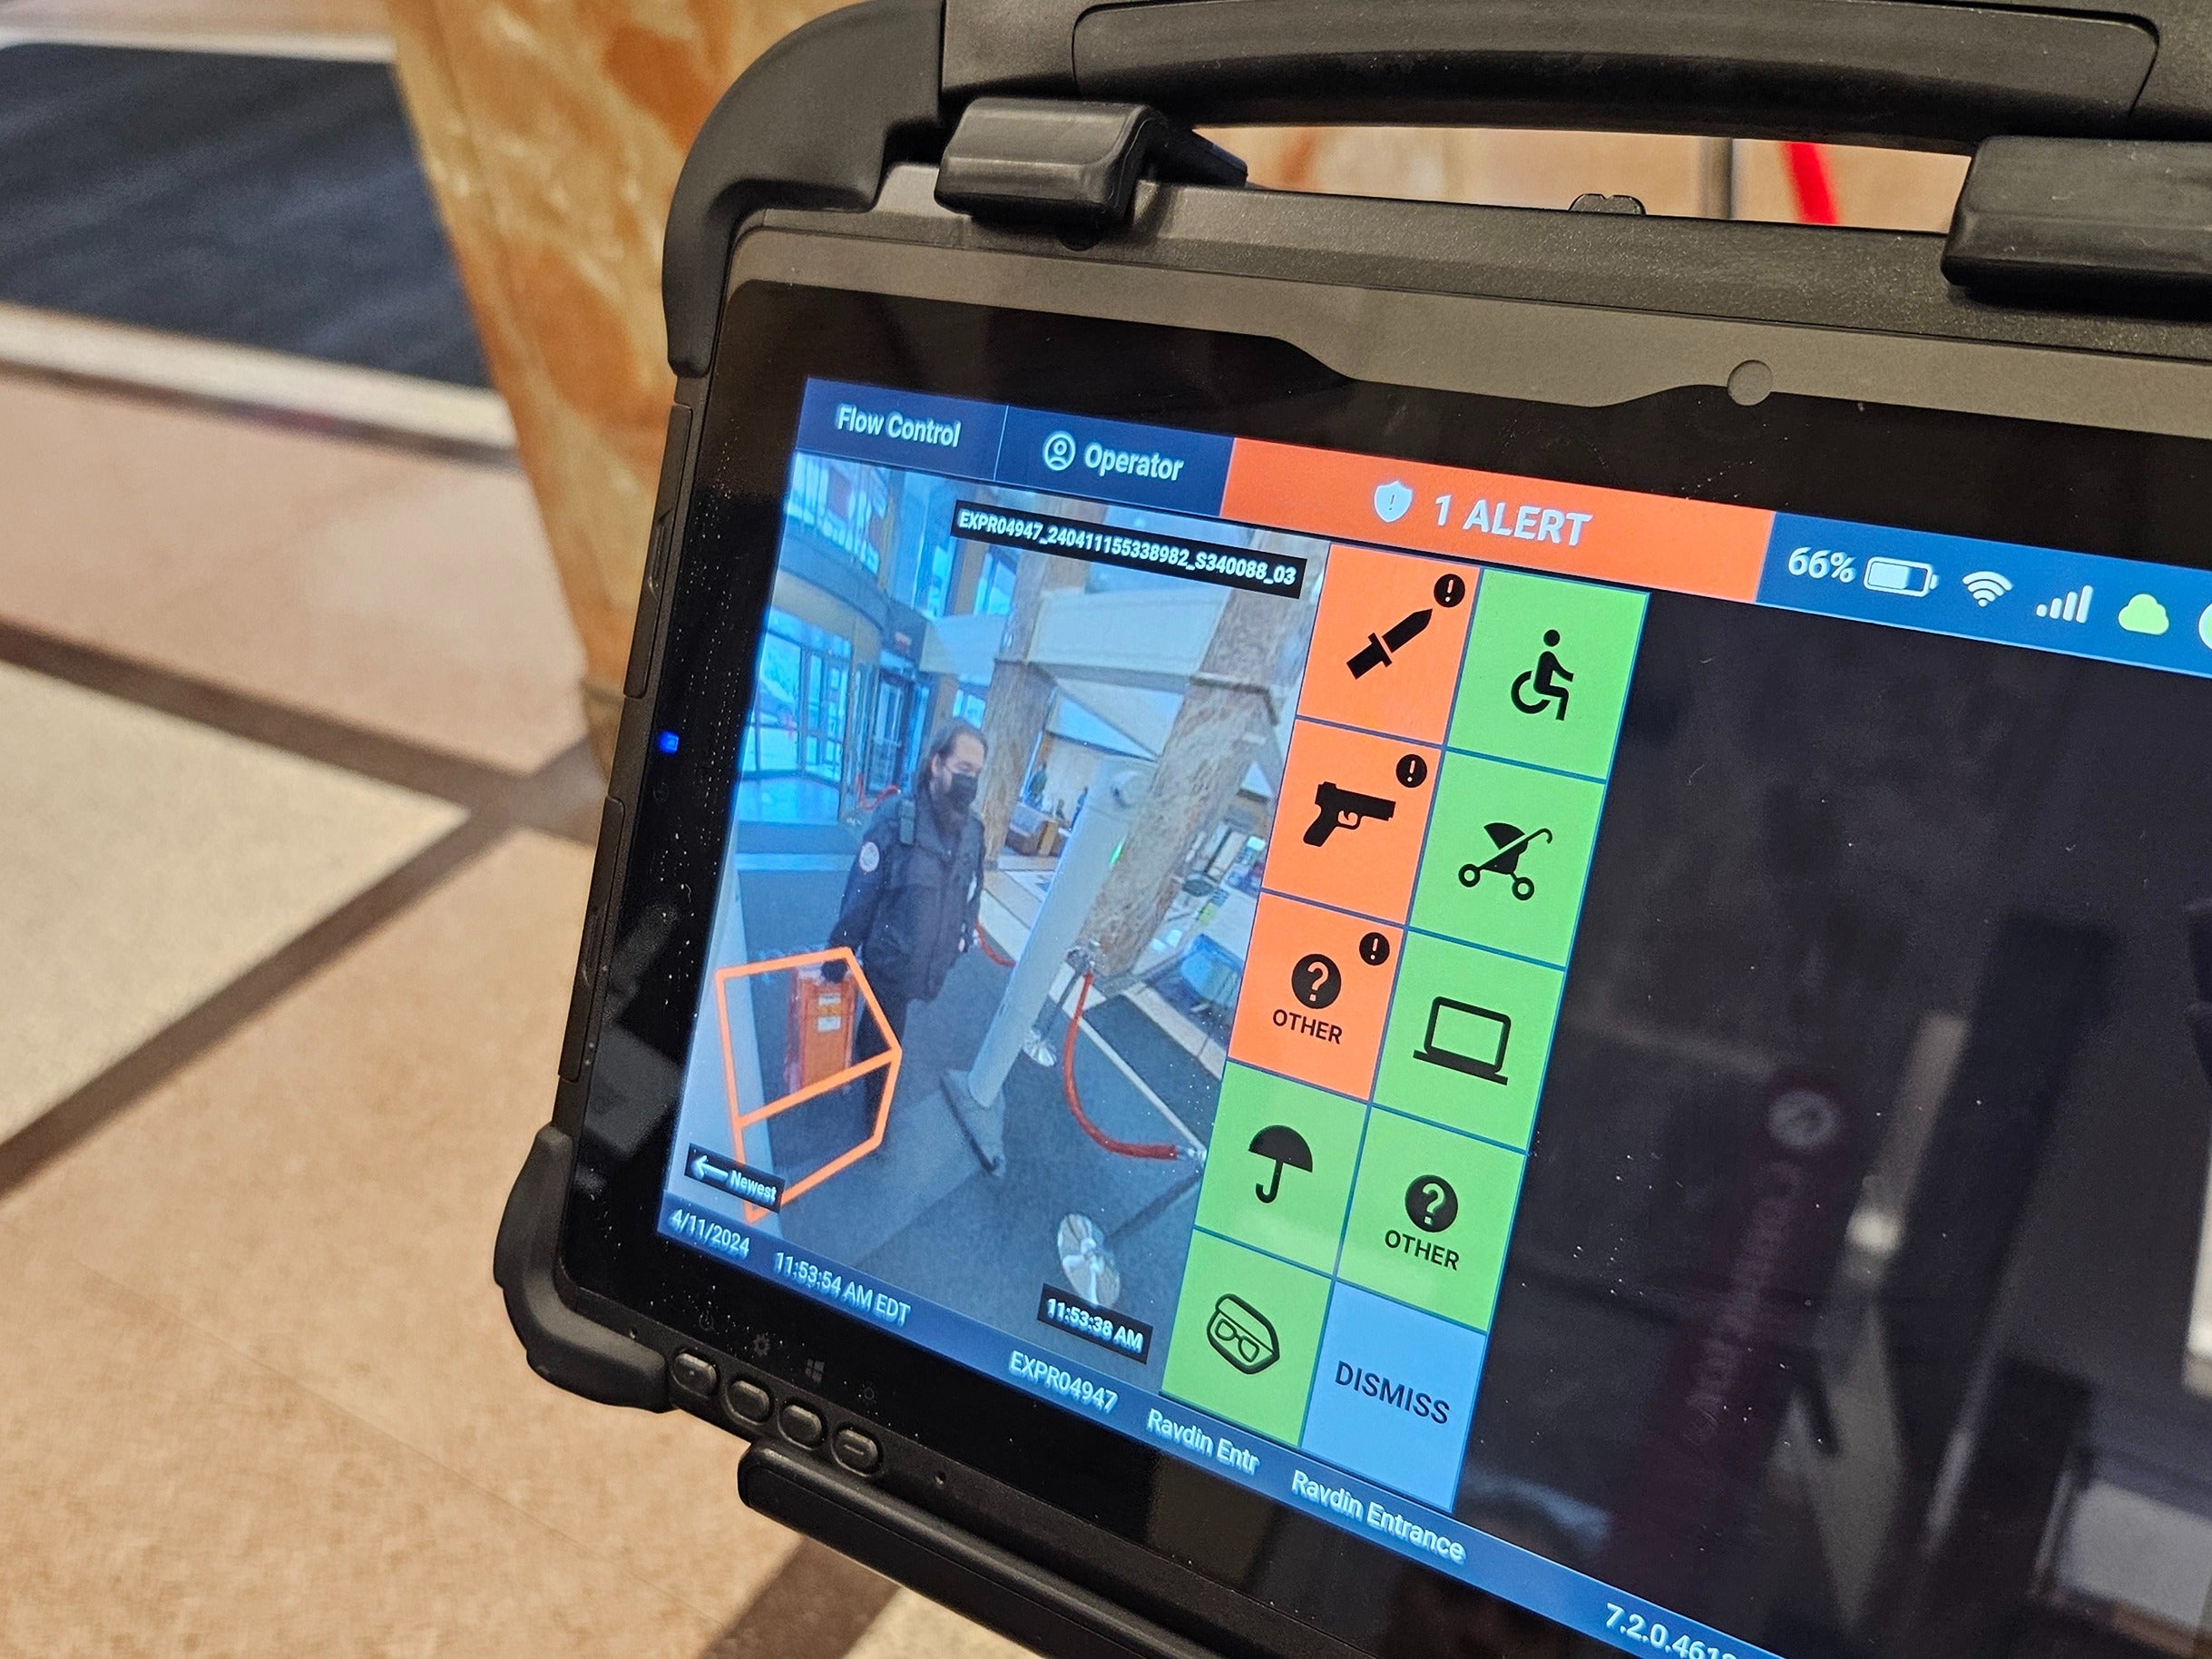 The Evolv weapons detection system tablet